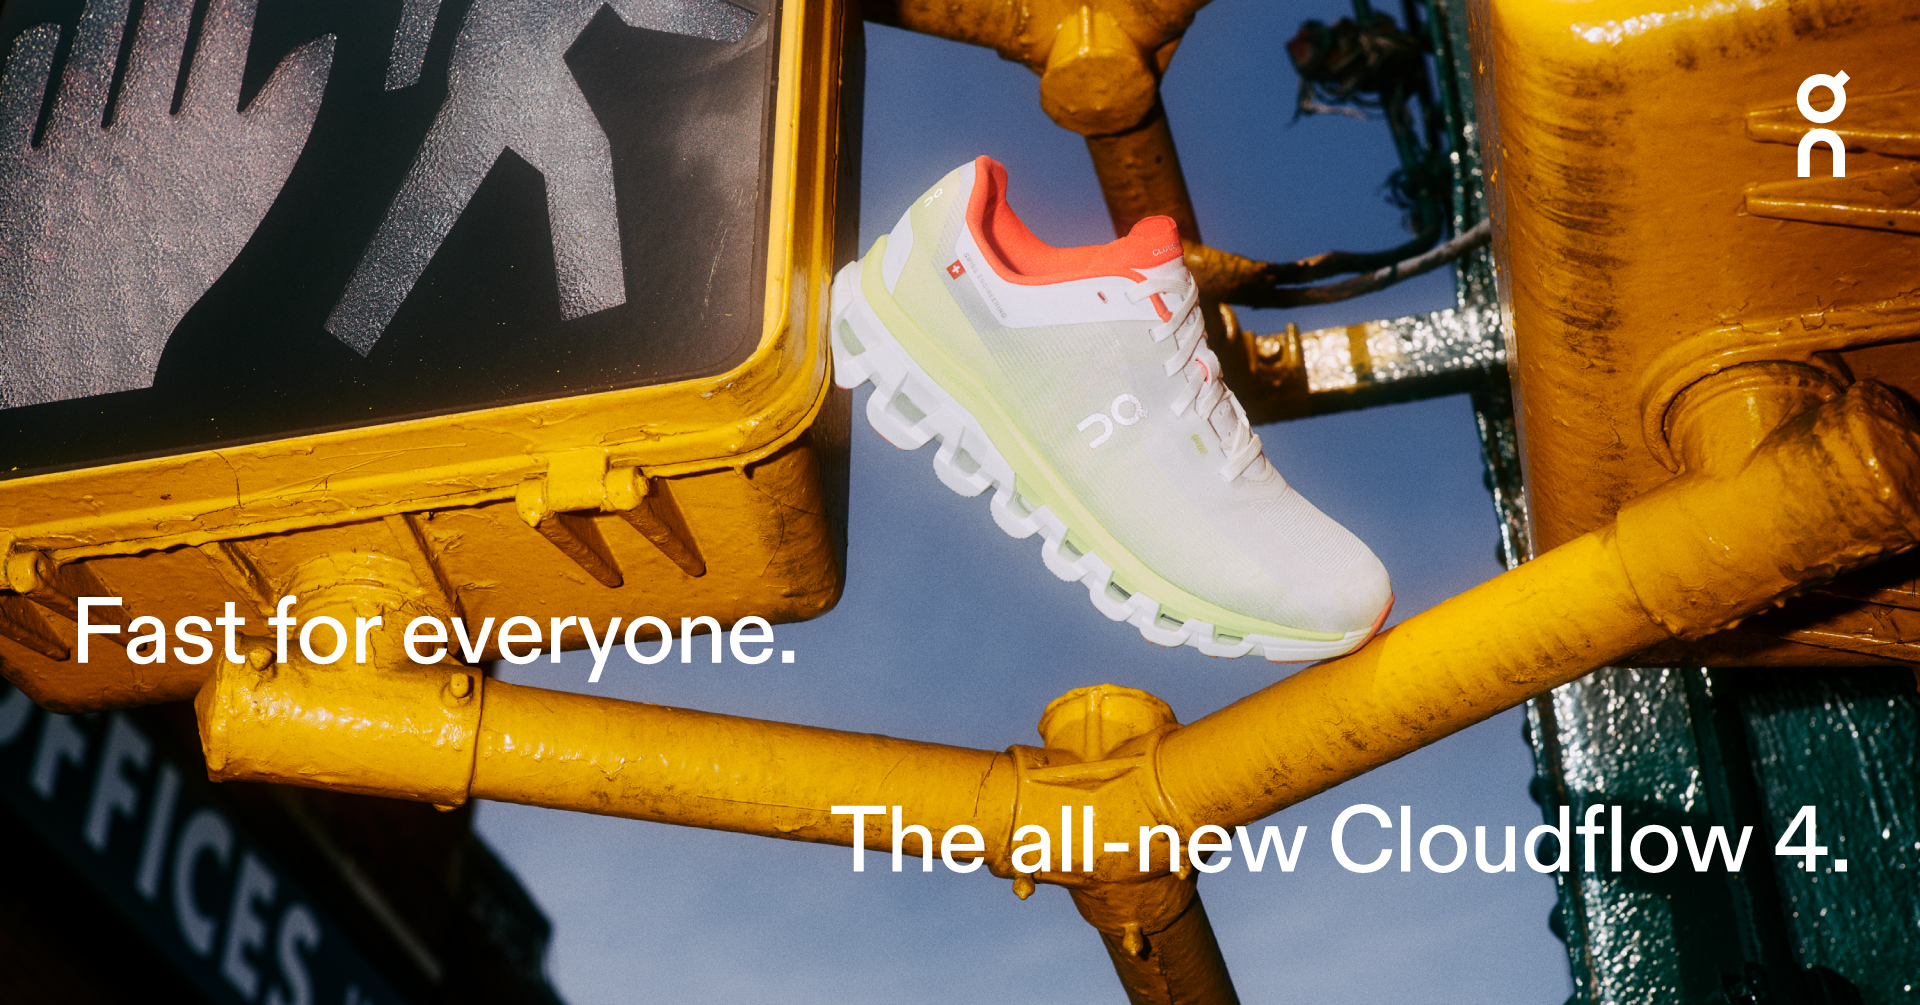 With Cloudflow 4 fast is now for everyone!, News